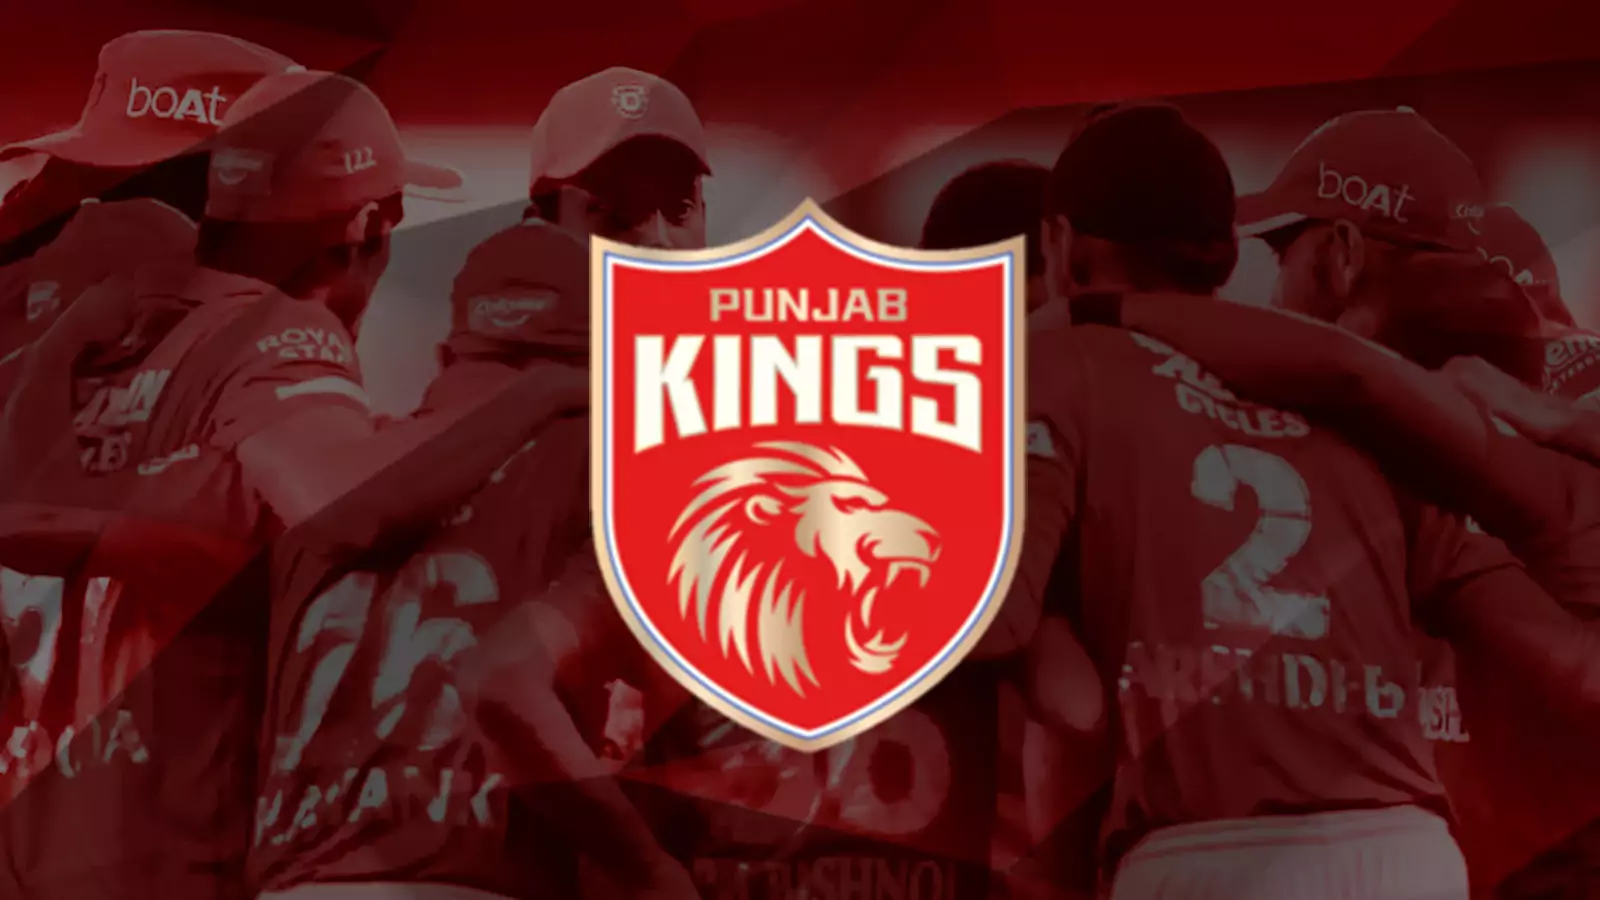 Test your luck and place bets on Punjab Kings.